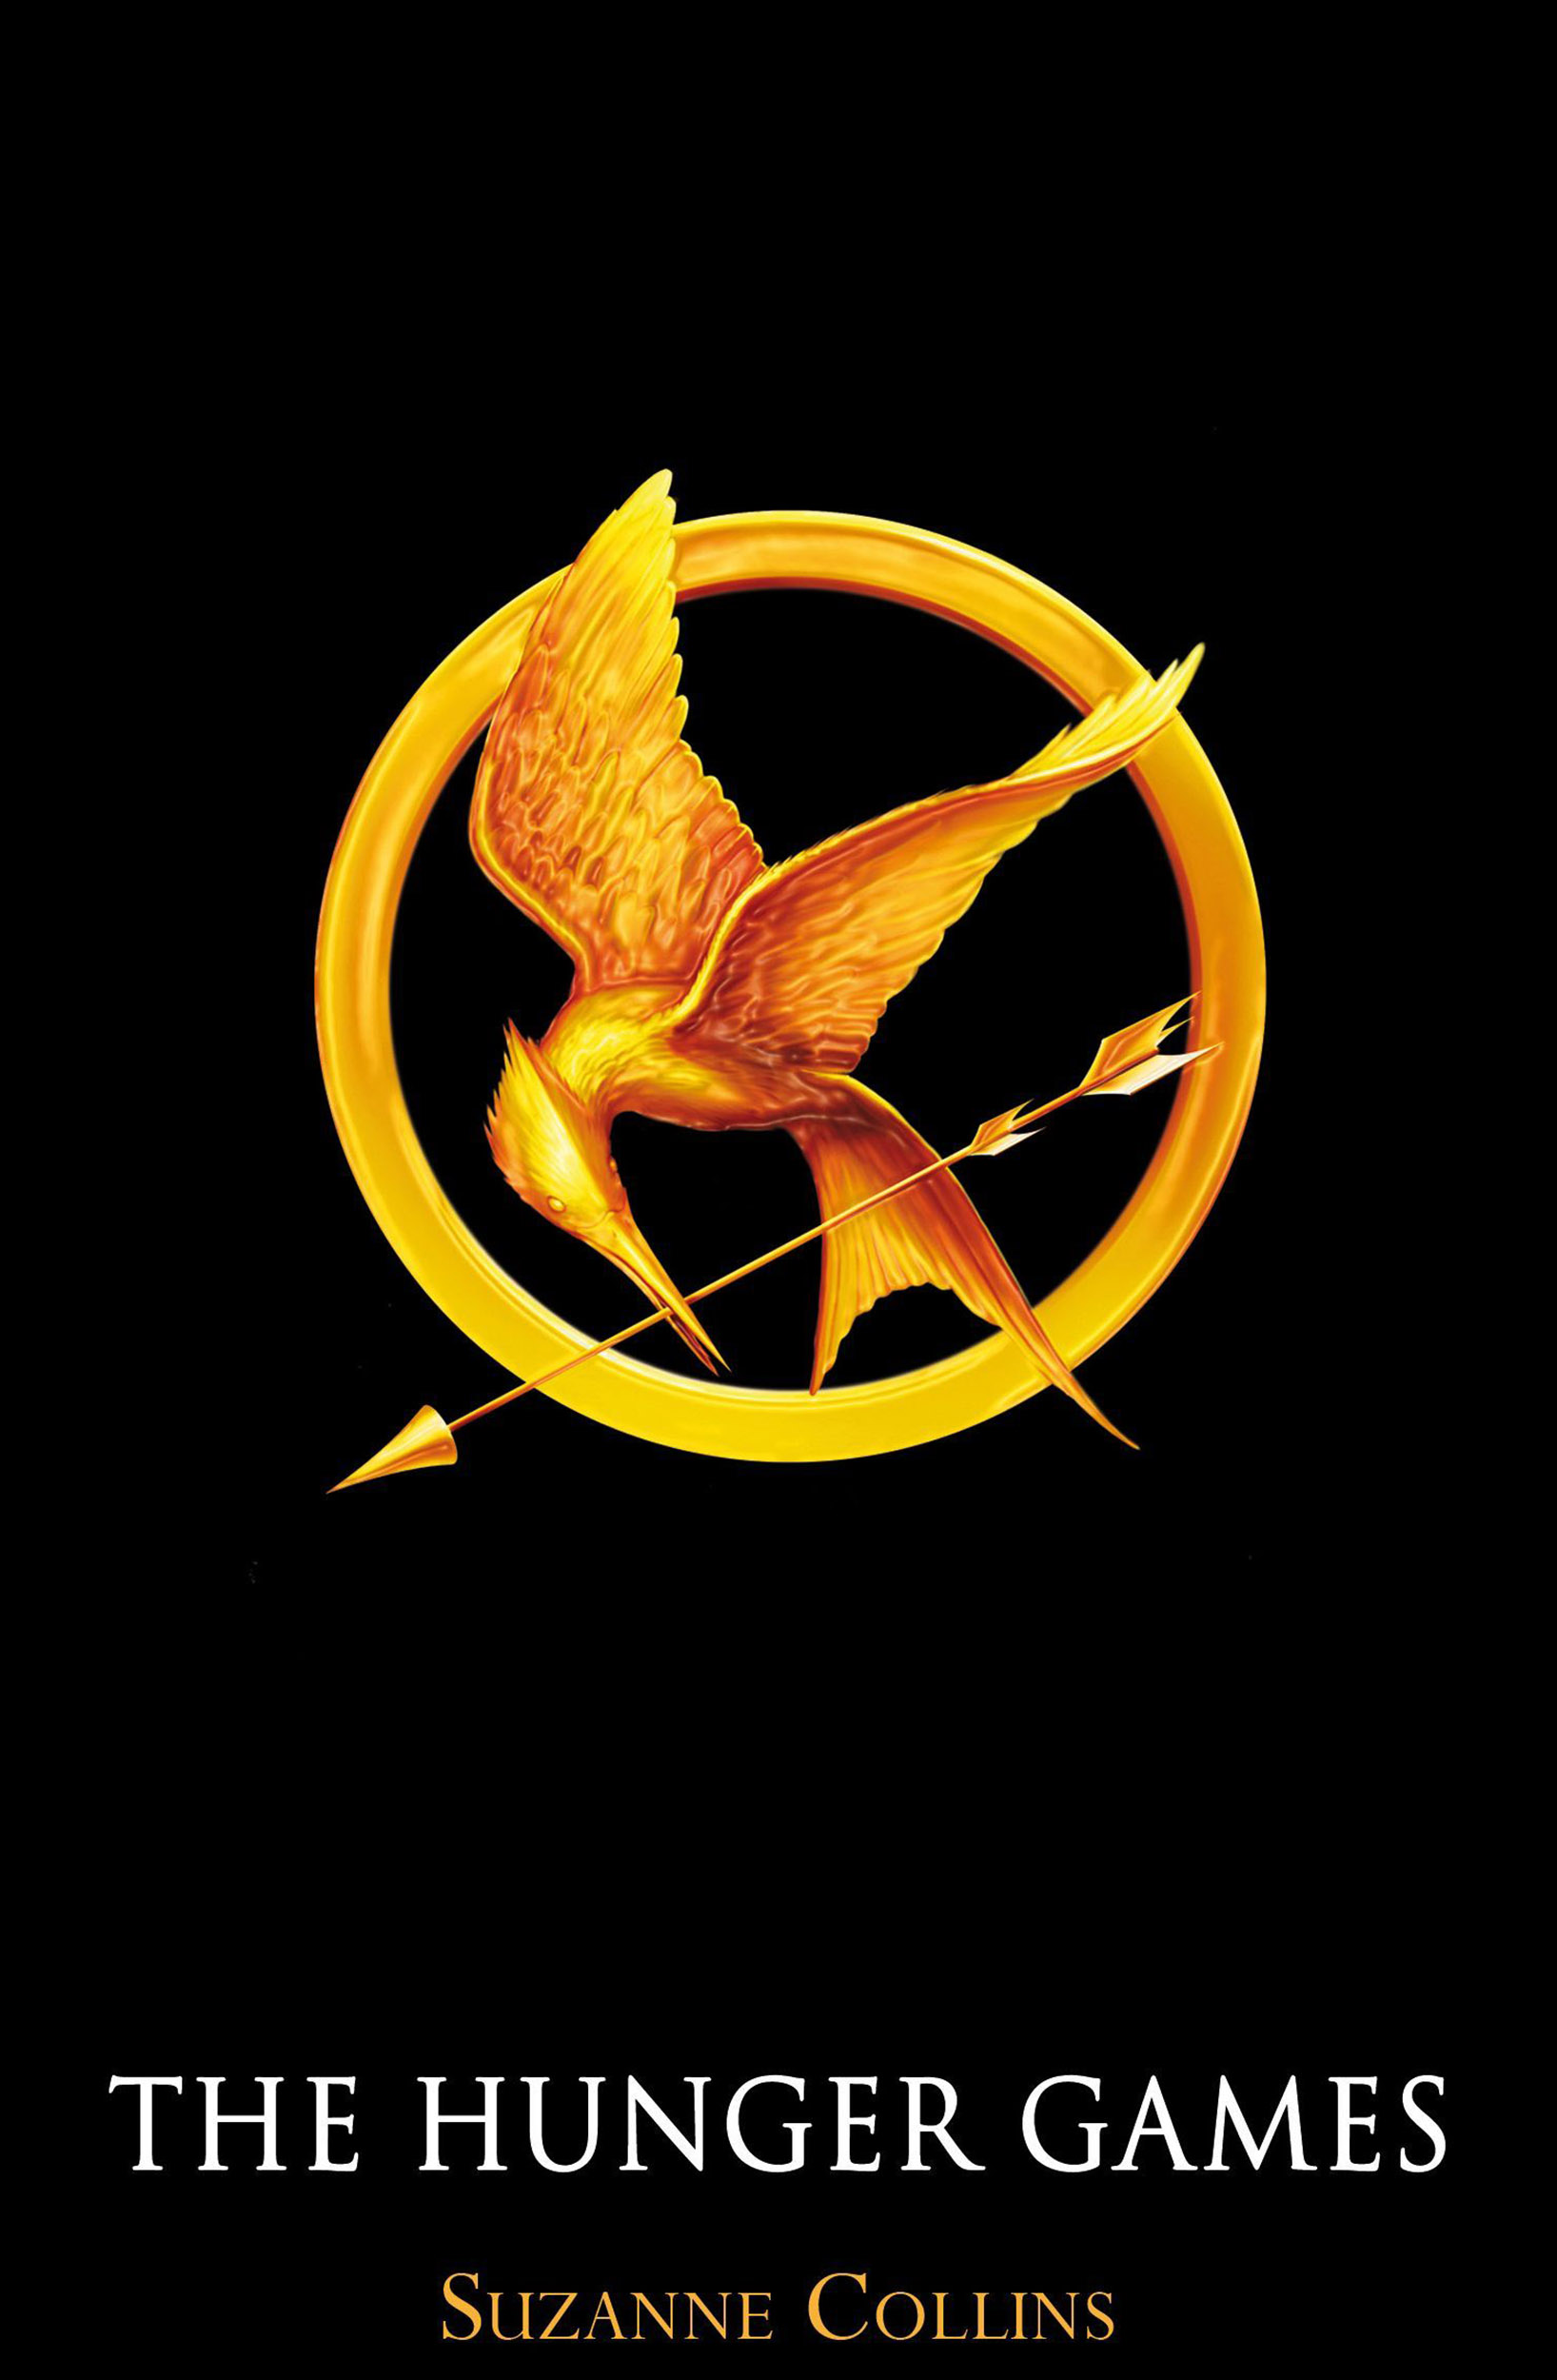 book review for the hunger games